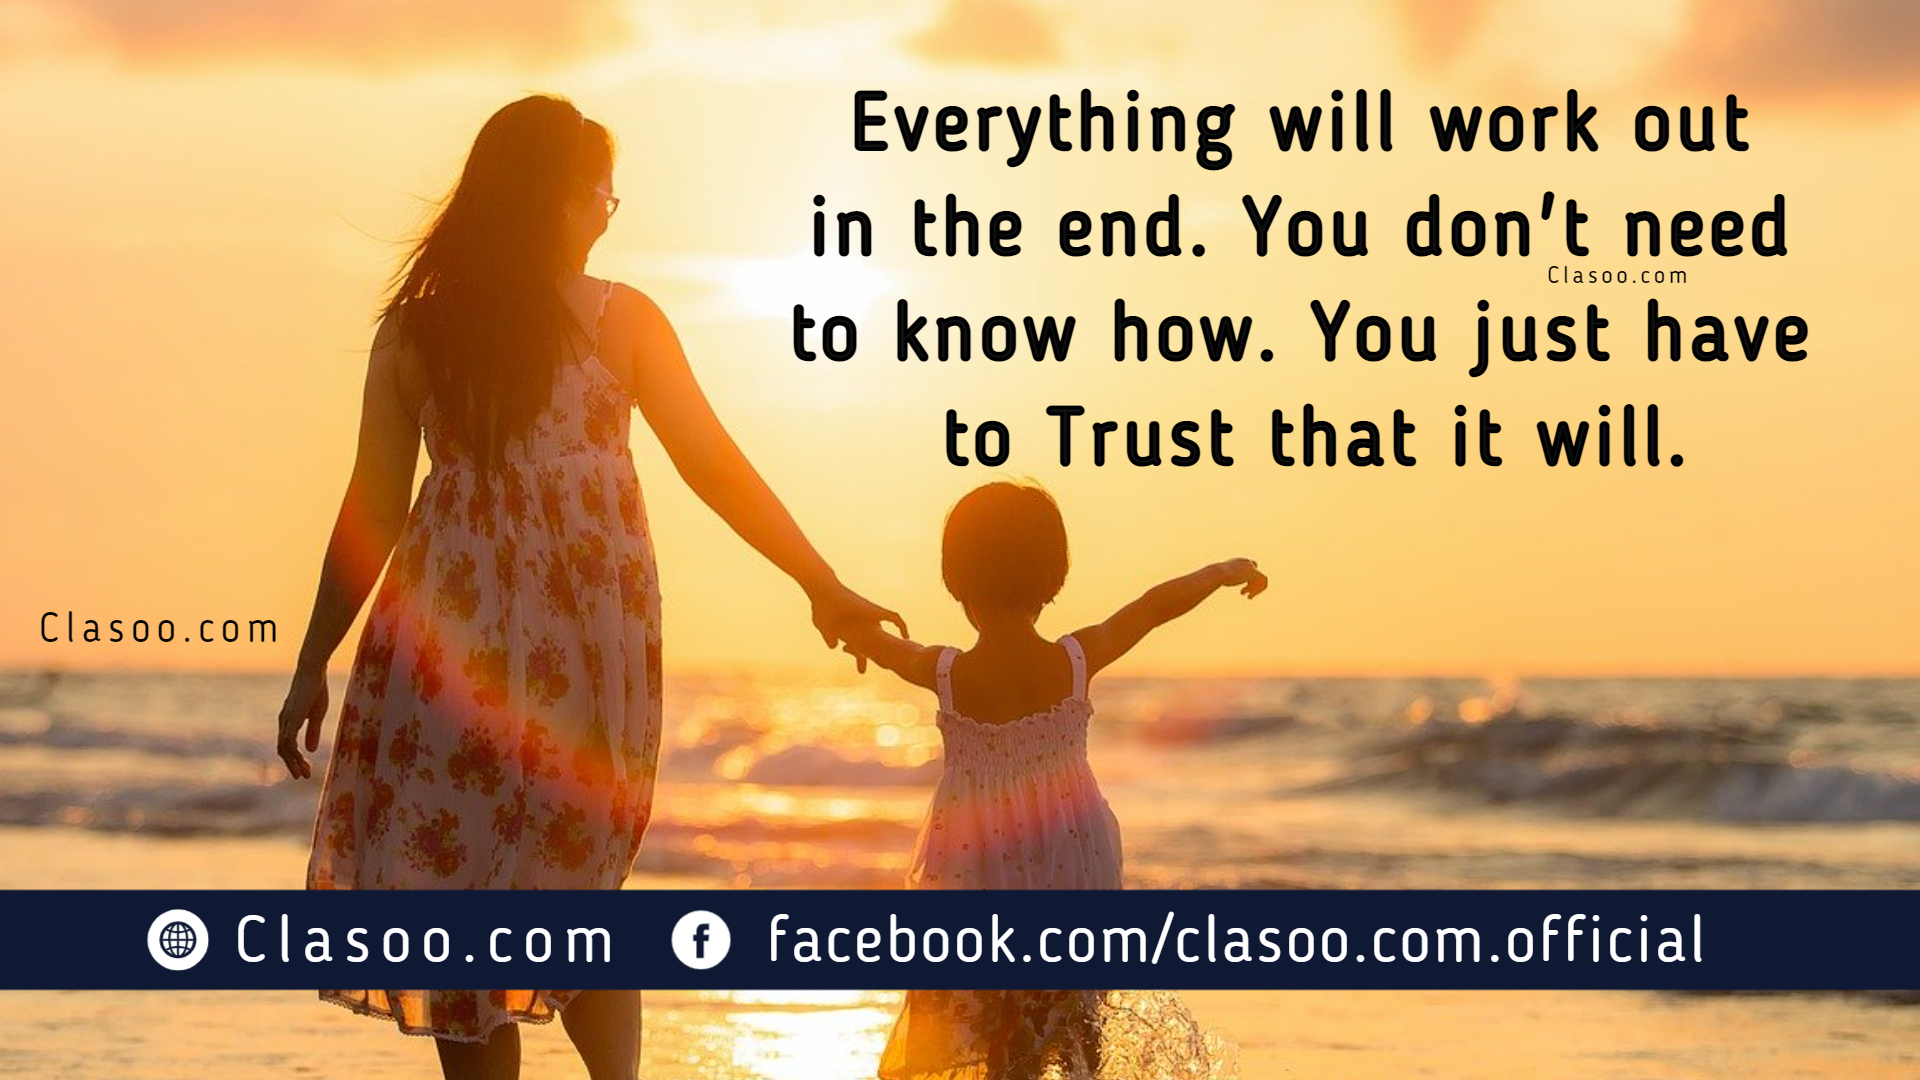 Everything will workout in the end. You don't need to know how. You just have to Trust that it will.